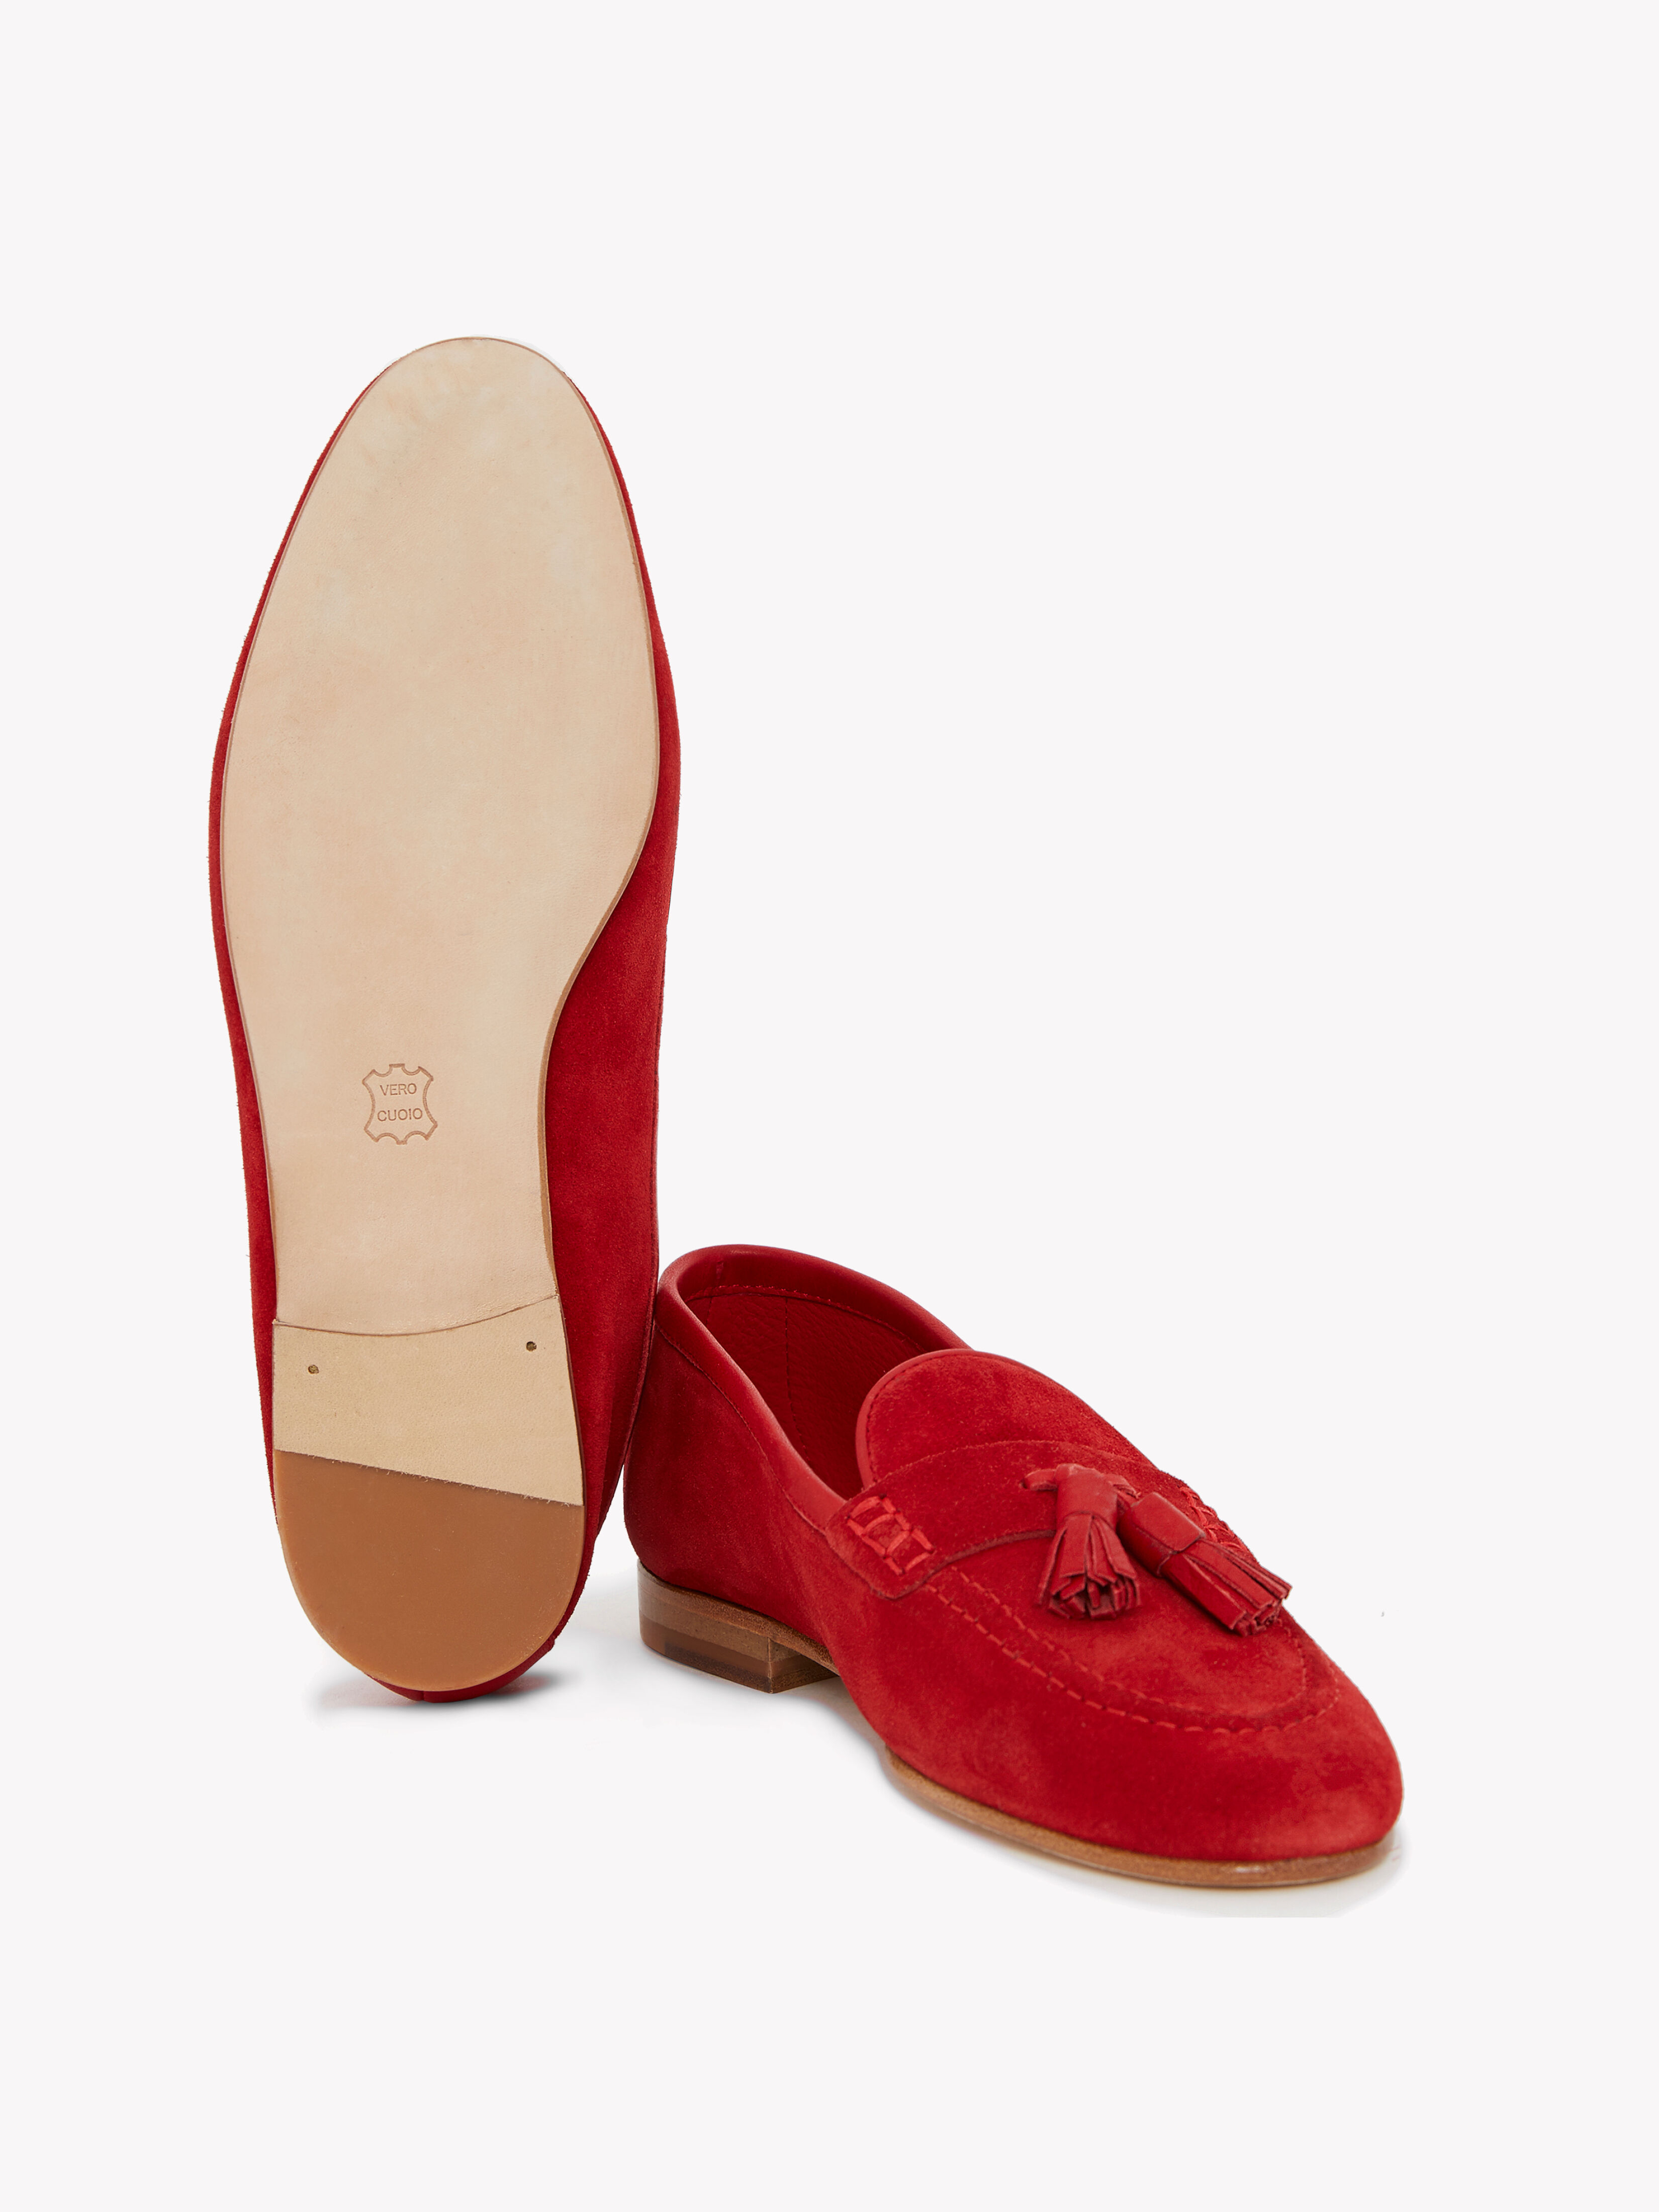 Ashton Loafer Suede - Women's Shoes at 